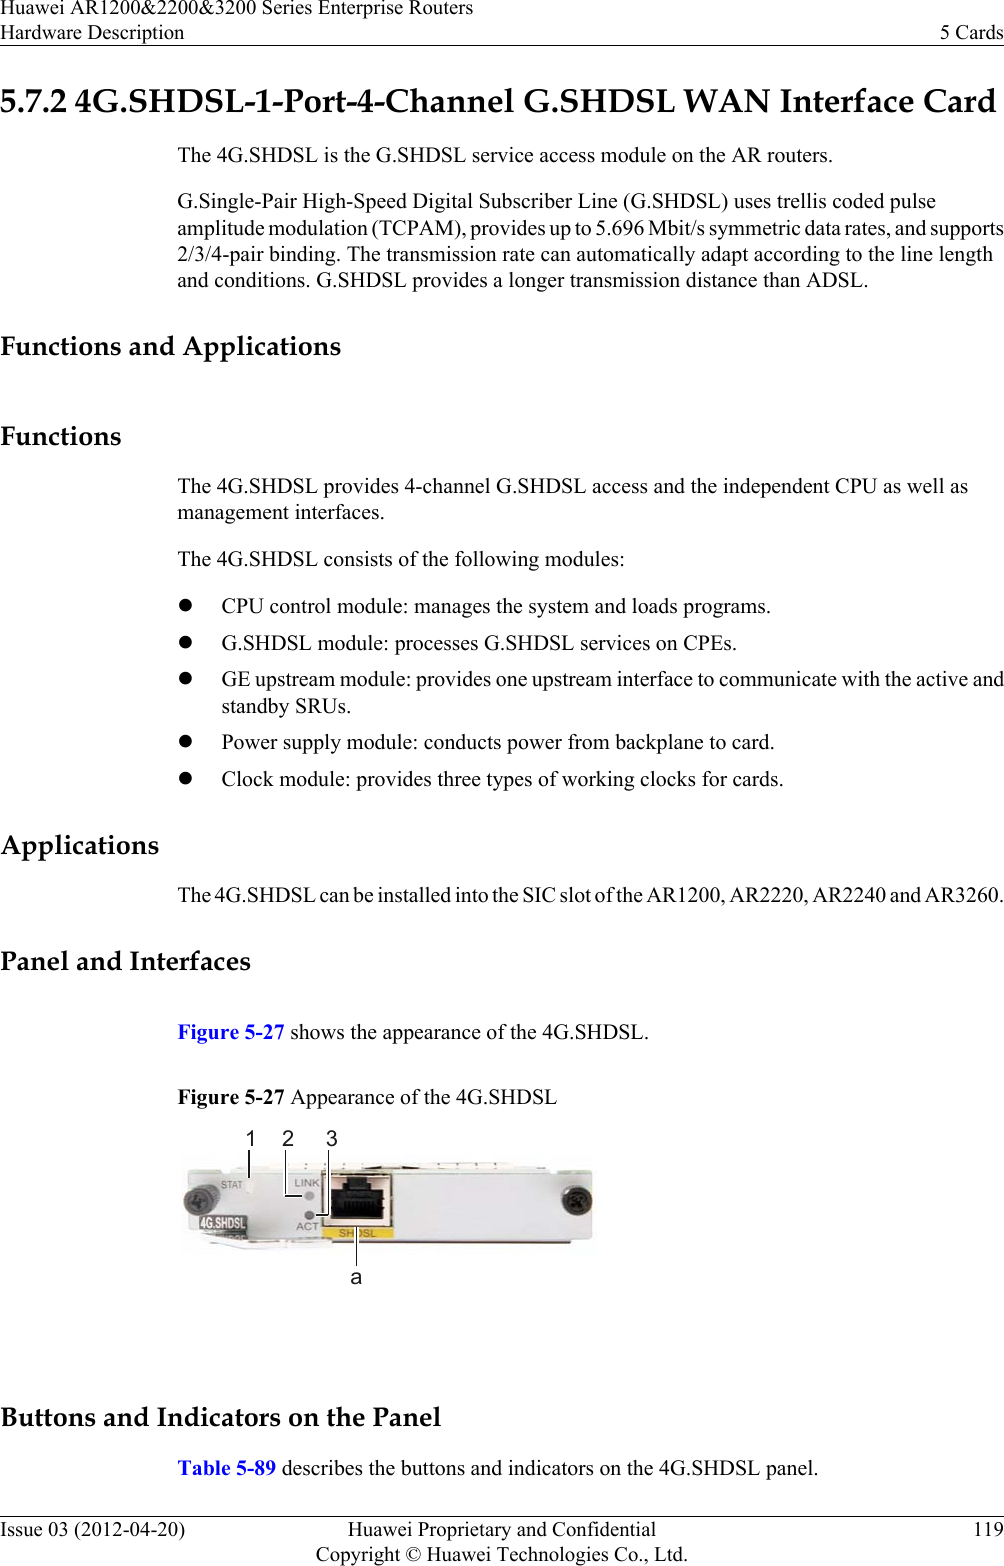 5.7.2 4G.SHDSL-1-Port-4-Channel G.SHDSL WAN Interface CardThe 4G.SHDSL is the G.SHDSL service access module on the AR routers.G.Single-Pair High-Speed Digital Subscriber Line (G.SHDSL) uses trellis coded pulseamplitude modulation (TCPAM), provides up to 5.696 Mbit/s symmetric data rates, and supports2/3/4-pair binding. The transmission rate can automatically adapt according to the line lengthand conditions. G.SHDSL provides a longer transmission distance than ADSL.Functions and ApplicationsFunctionsThe 4G.SHDSL provides 4-channel G.SHDSL access and the independent CPU as well asmanagement interfaces.The 4G.SHDSL consists of the following modules:lCPU control module: manages the system and loads programs.lG.SHDSL module: processes G.SHDSL services on CPEs.lGE upstream module: provides one upstream interface to communicate with the active andstandby SRUs.lPower supply module: conducts power from backplane to card.lClock module: provides three types of working clocks for cards.ApplicationsThe 4G.SHDSL can be installed into the SIC slot of the AR1200, AR2220, AR2240 and AR3260.Panel and InterfacesFigure 5-27 shows the appearance of the 4G.SHDSL.Figure 5-27 Appearance of the 4G.SHDSL1 2 3a Buttons and Indicators on the PanelTable 5-89 describes the buttons and indicators on the 4G.SHDSL panel.Huawei AR1200&amp;2200&amp;3200 Series Enterprise RoutersHardware Description 5 CardsIssue 03 (2012-04-20) Huawei Proprietary and ConfidentialCopyright © Huawei Technologies Co., Ltd.119